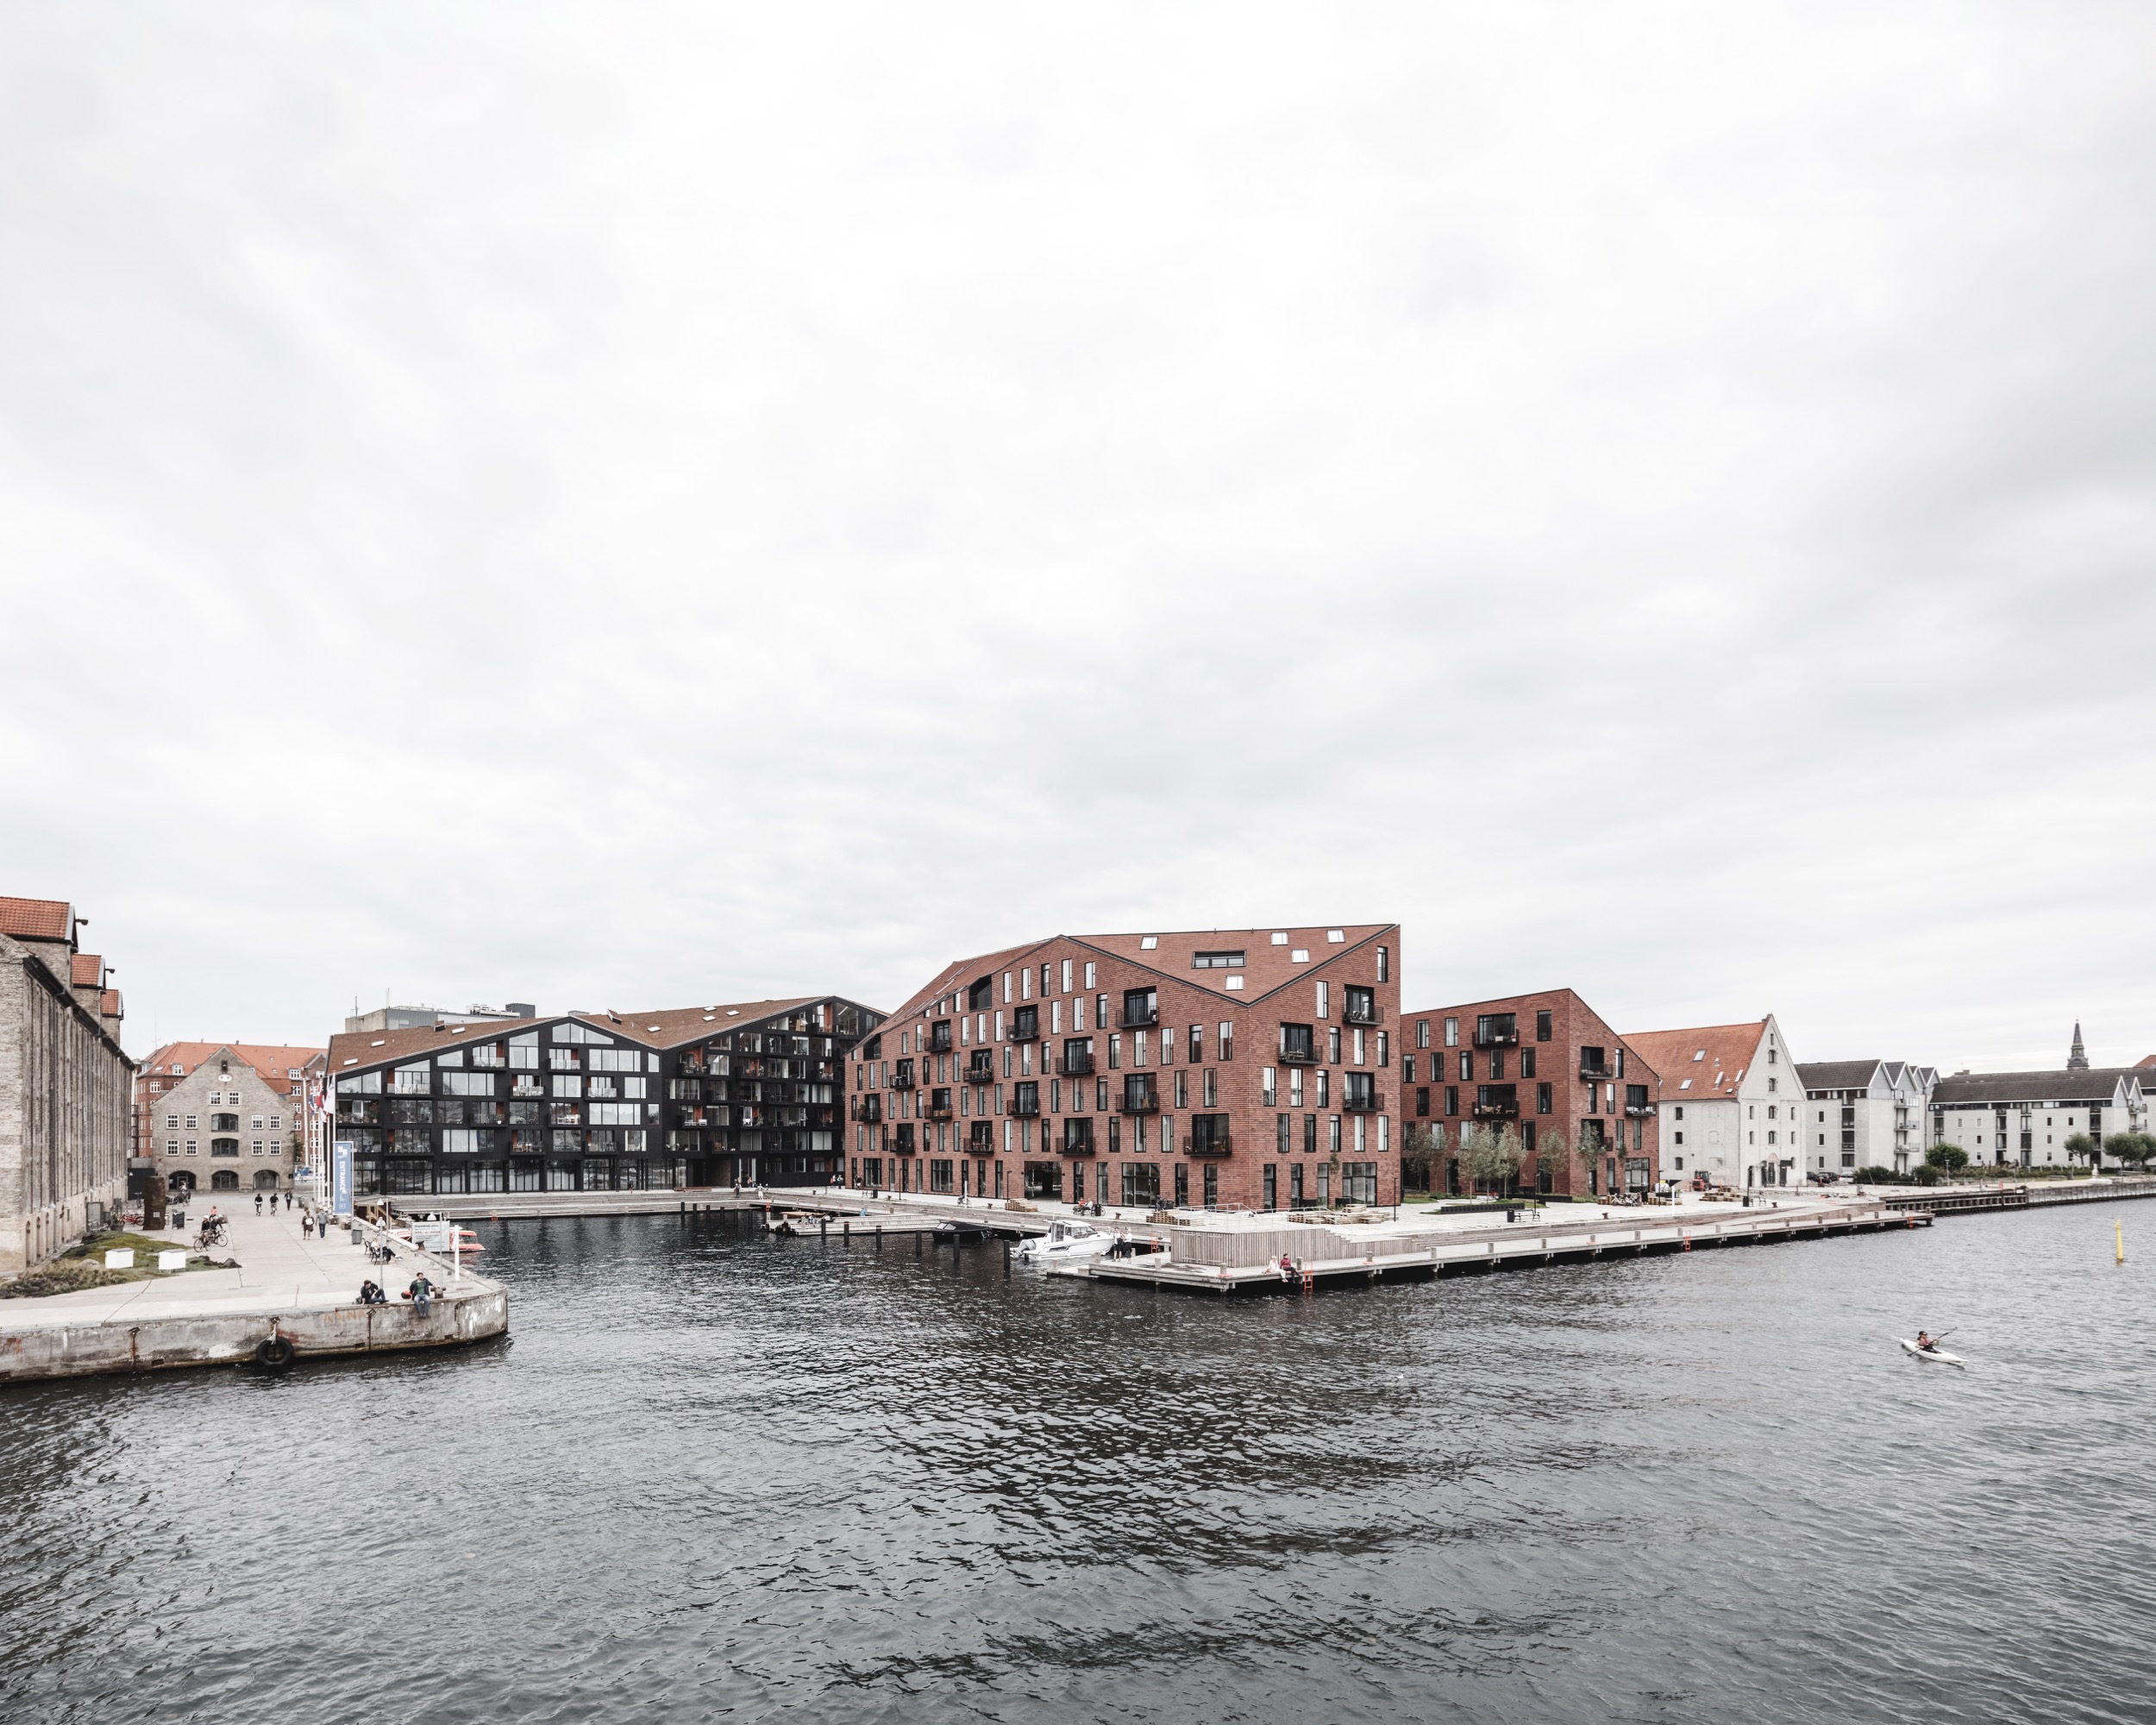 Krøyers Plads: Hot Spot with a History - Danish Architecture Center - DAC